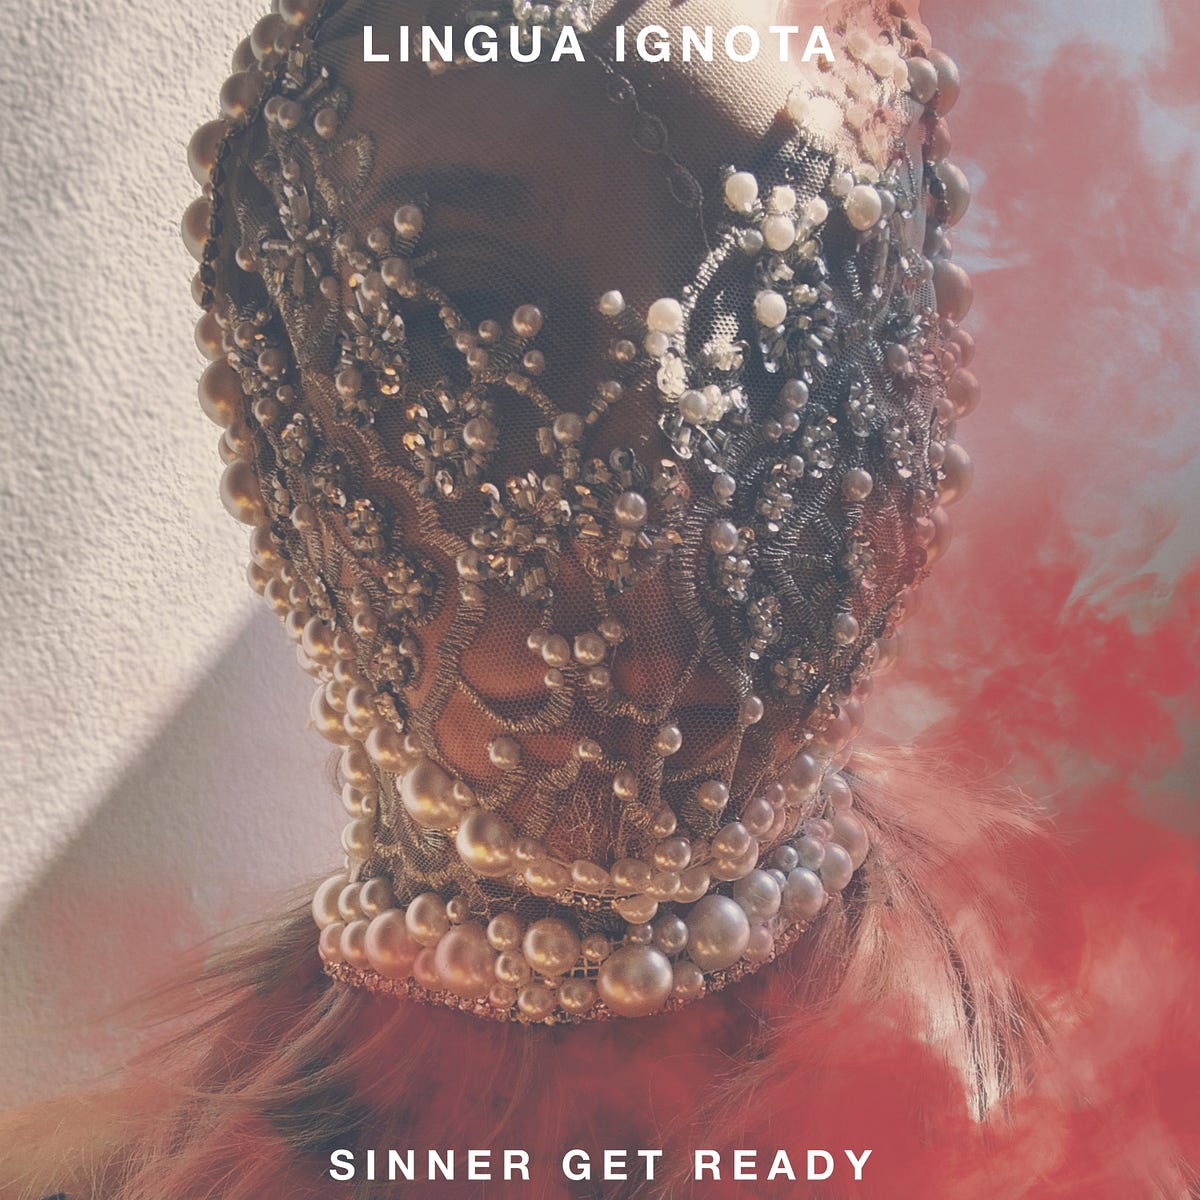 Sinner Get Ready By Lingua Ignota Album Review By Z Side S Music Reviews Modern Music